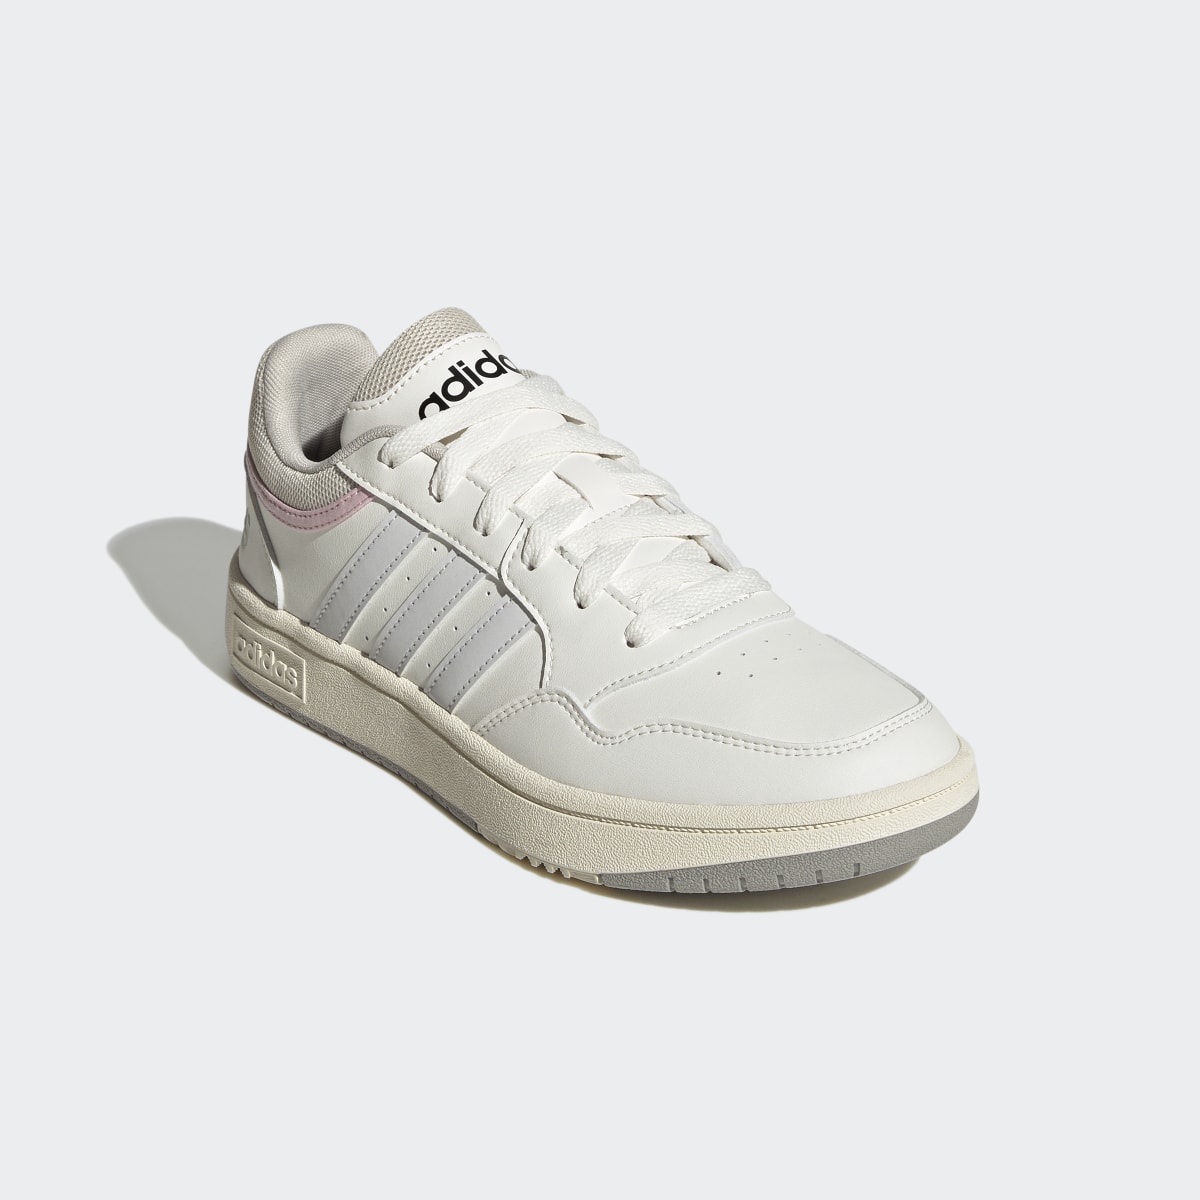 Adidas Hoops 3.0 Mid Lifestyle Basketball Low Shoes. 5